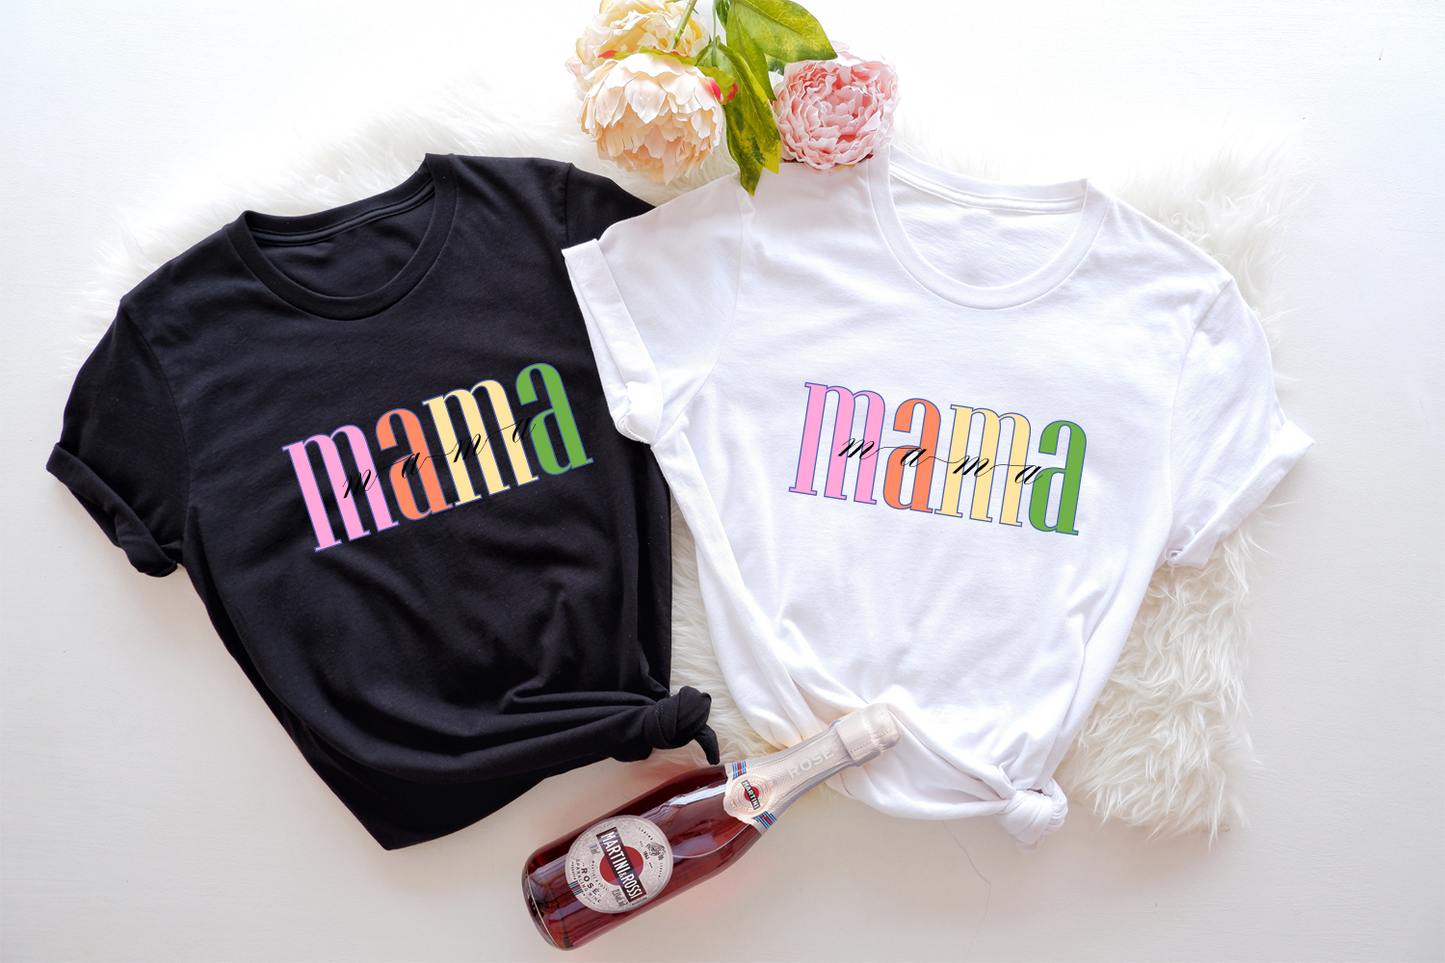 Retro Mama T-shirt: A throwback tee for moms who love vintage style.